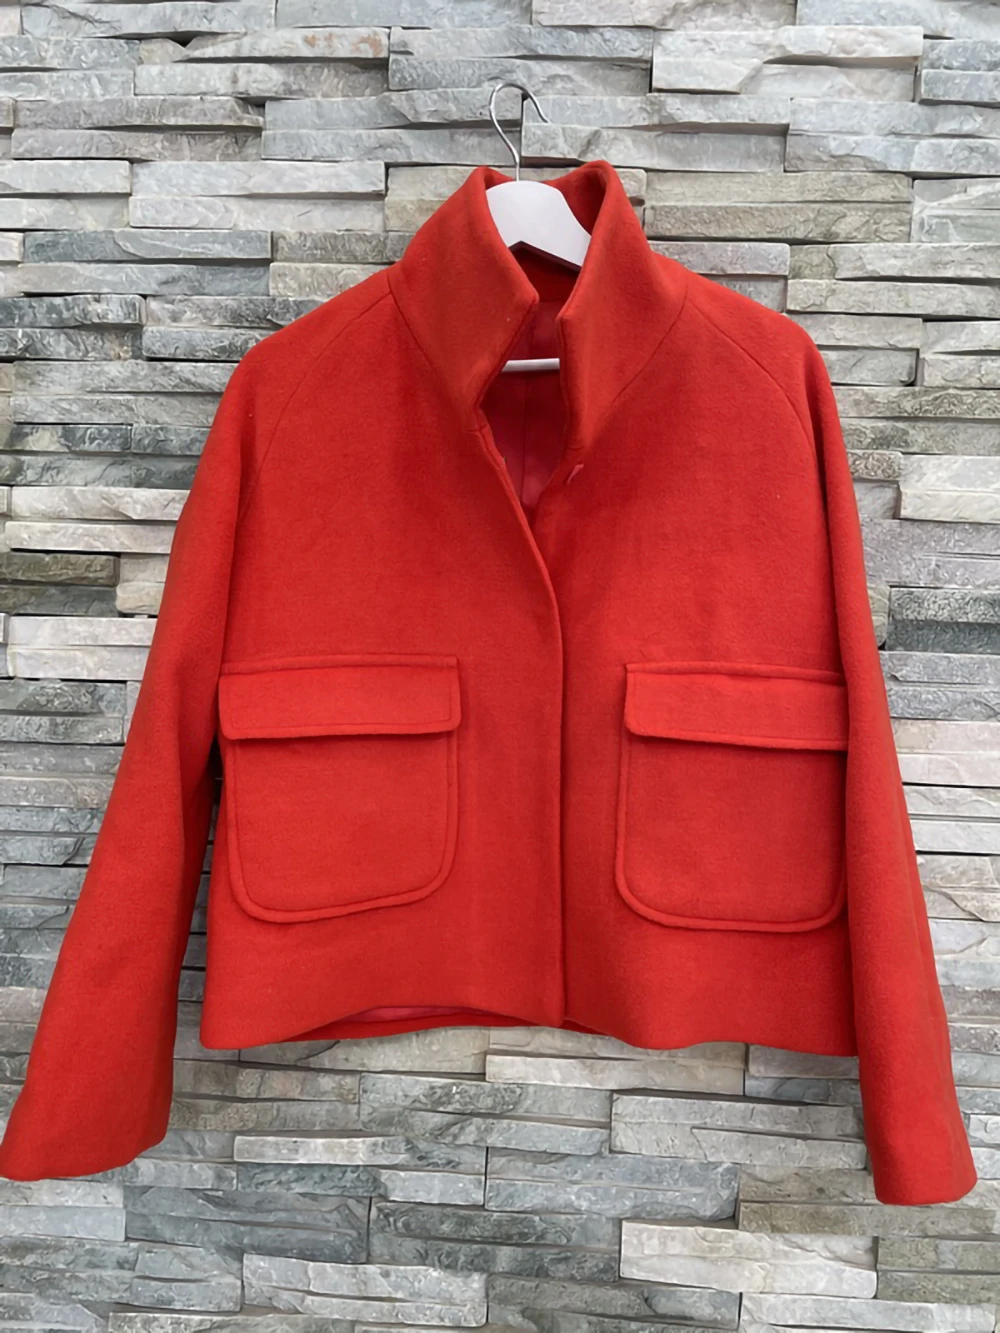 Red Color Wool Jacket Plaid Outerwear Fall  Winter Fall Jacket Clothes Tweed Short Coat Women